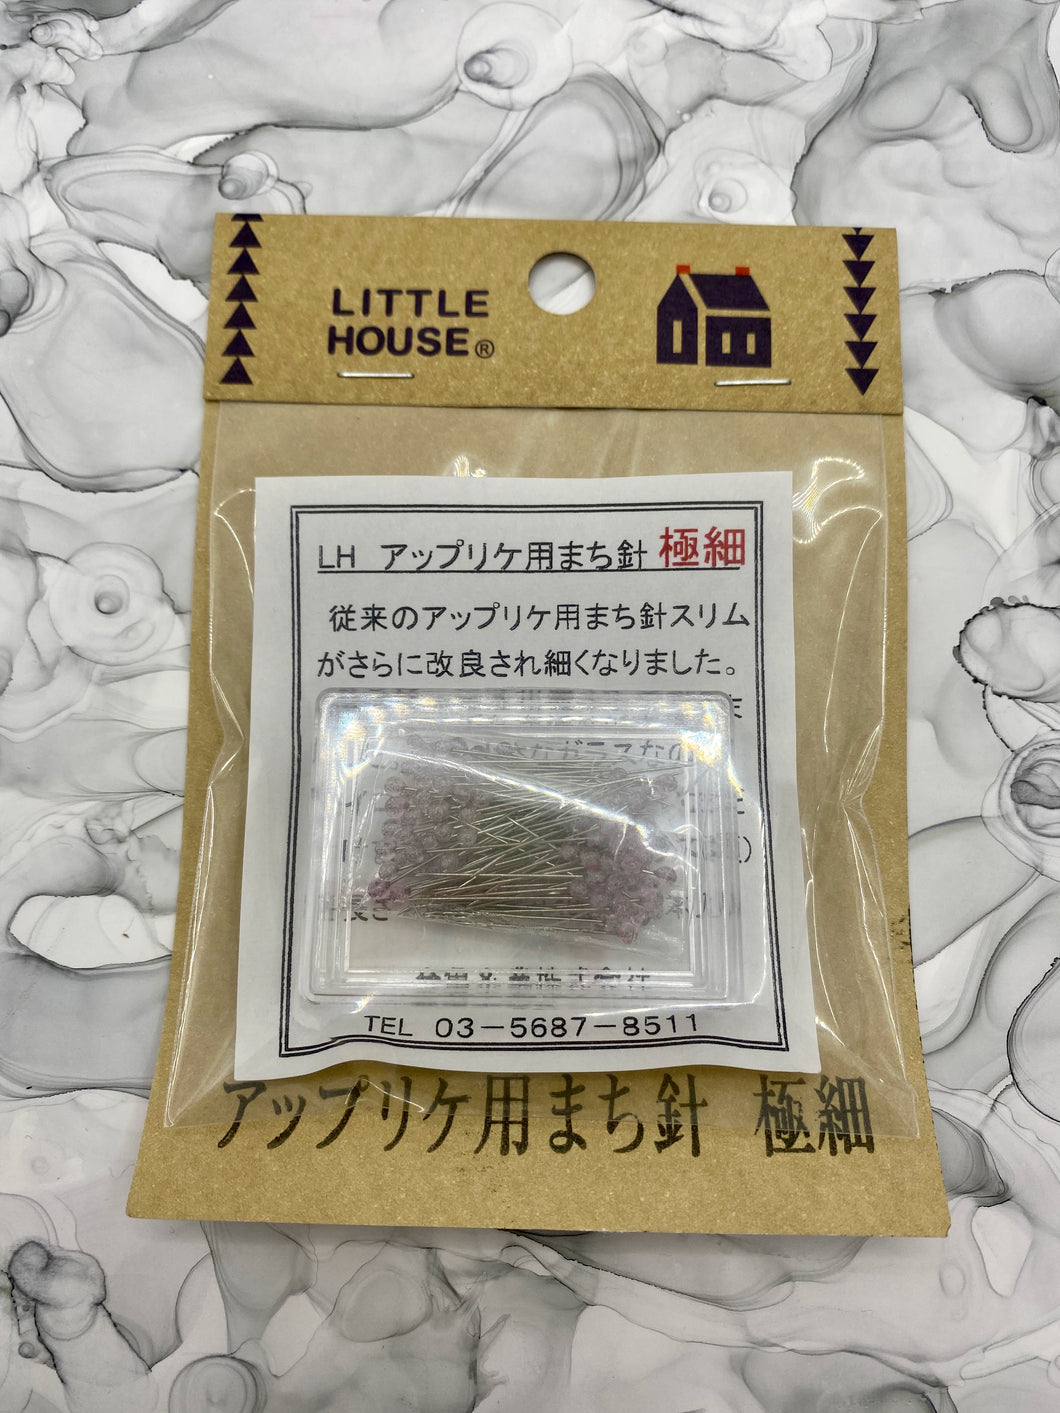 Appliqué Pins by Little House of Japan